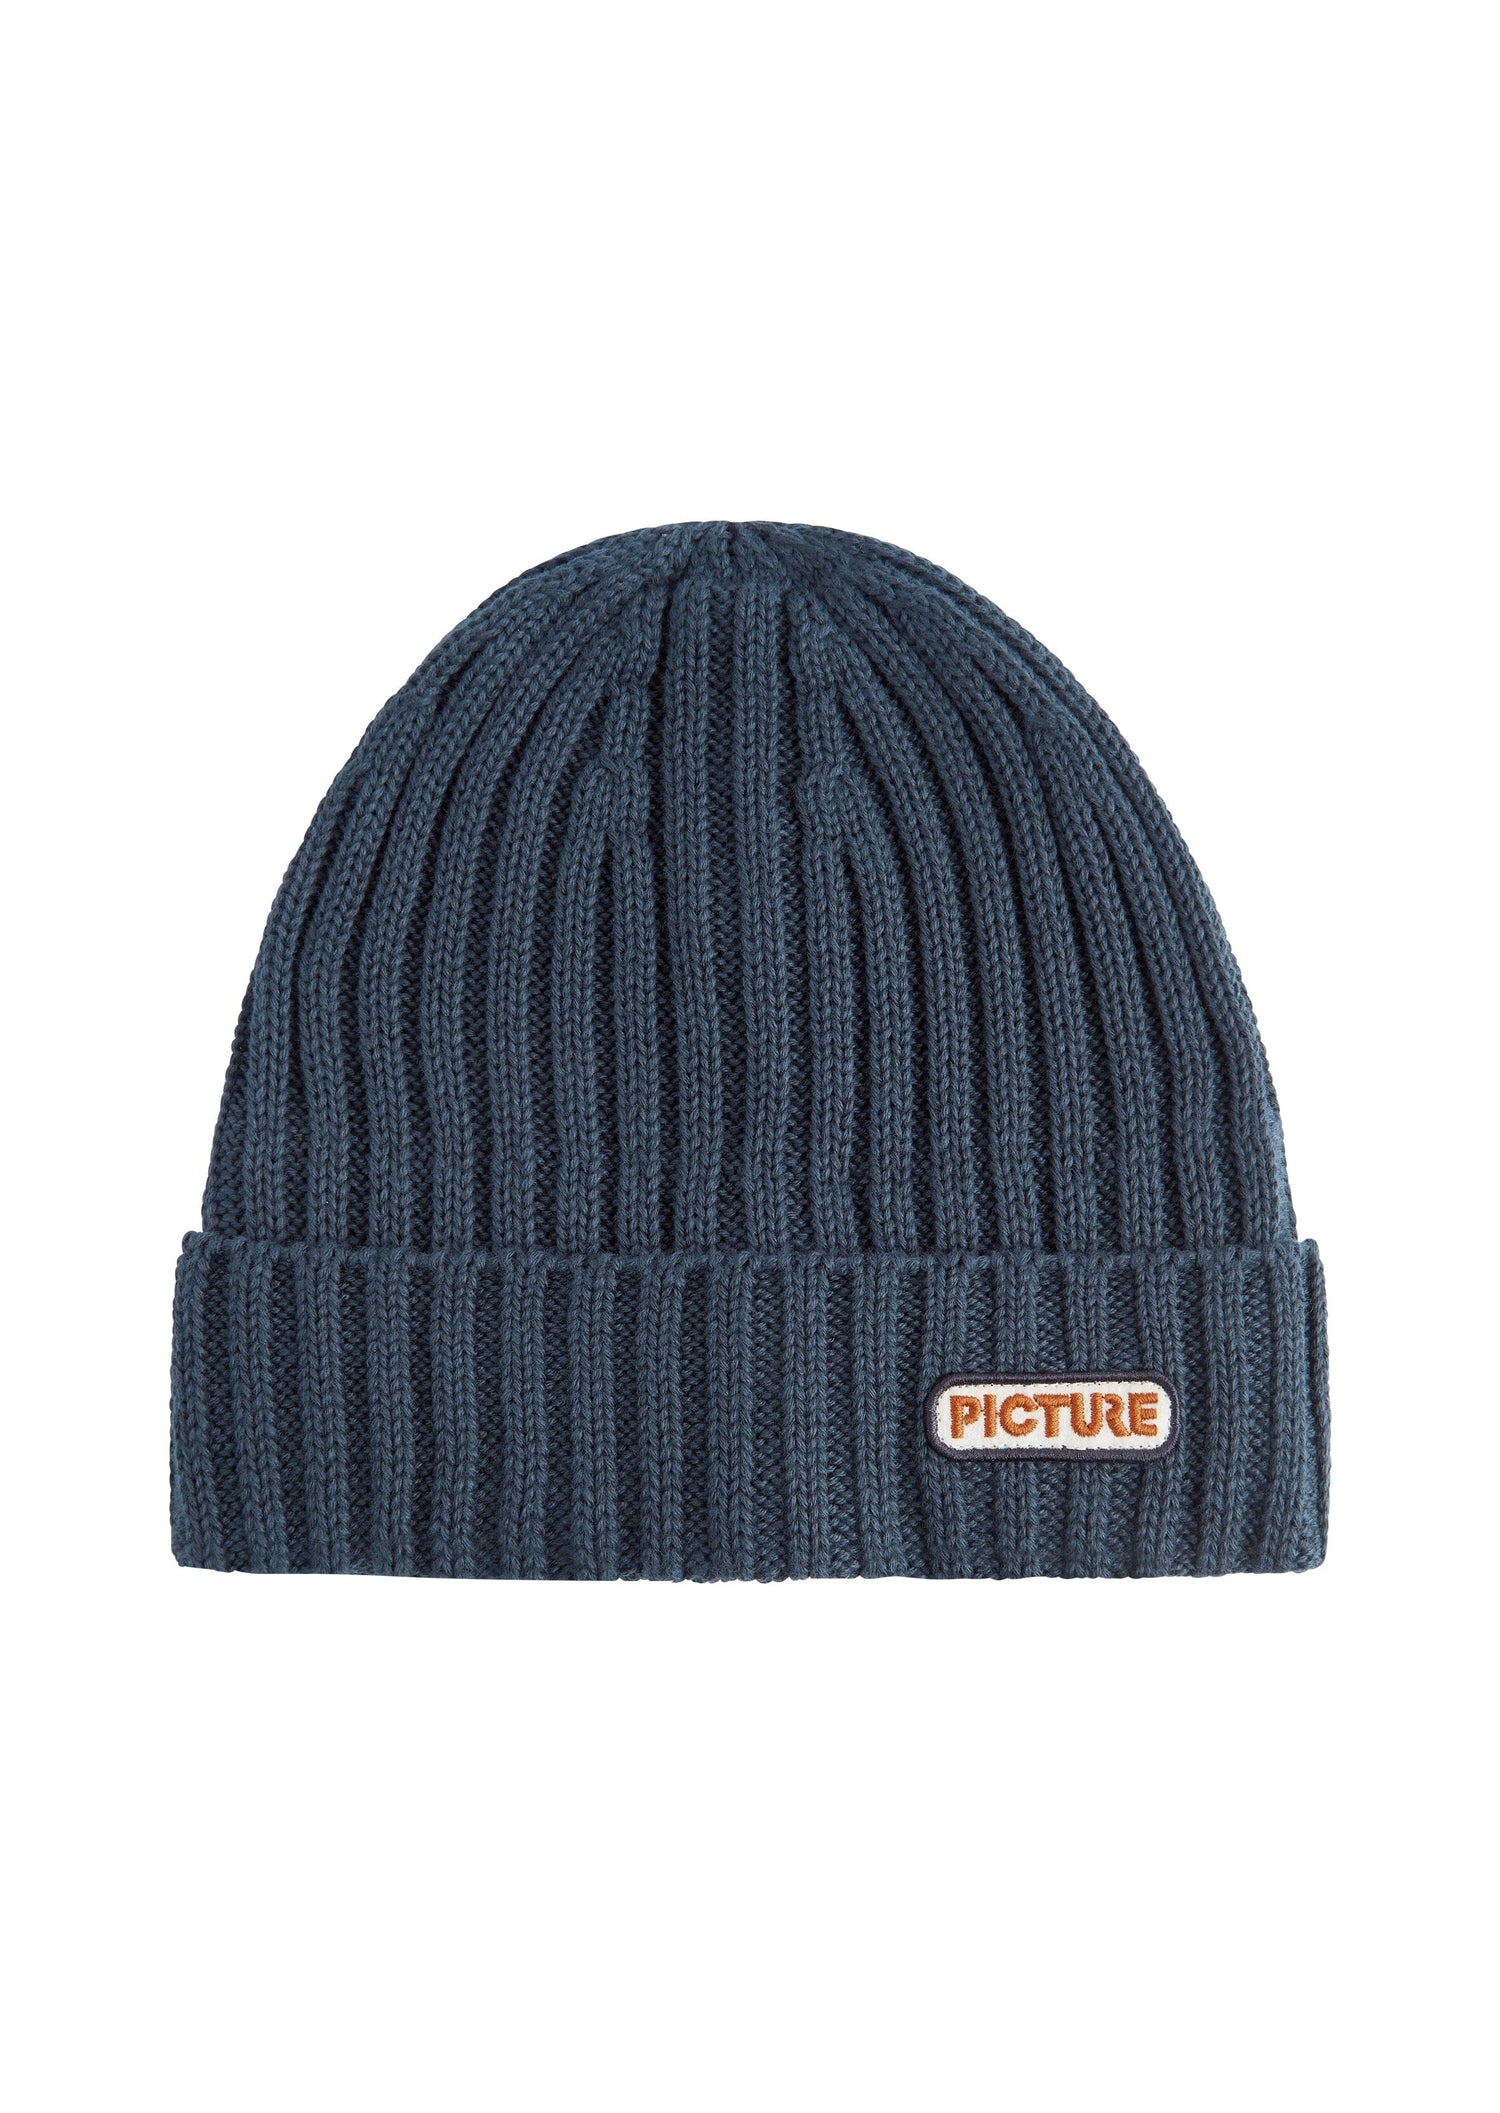 Picture Organic - Unisex Ship Beanie - Recycled Polyester & Wool - Weekendbee - sustainable sportswear